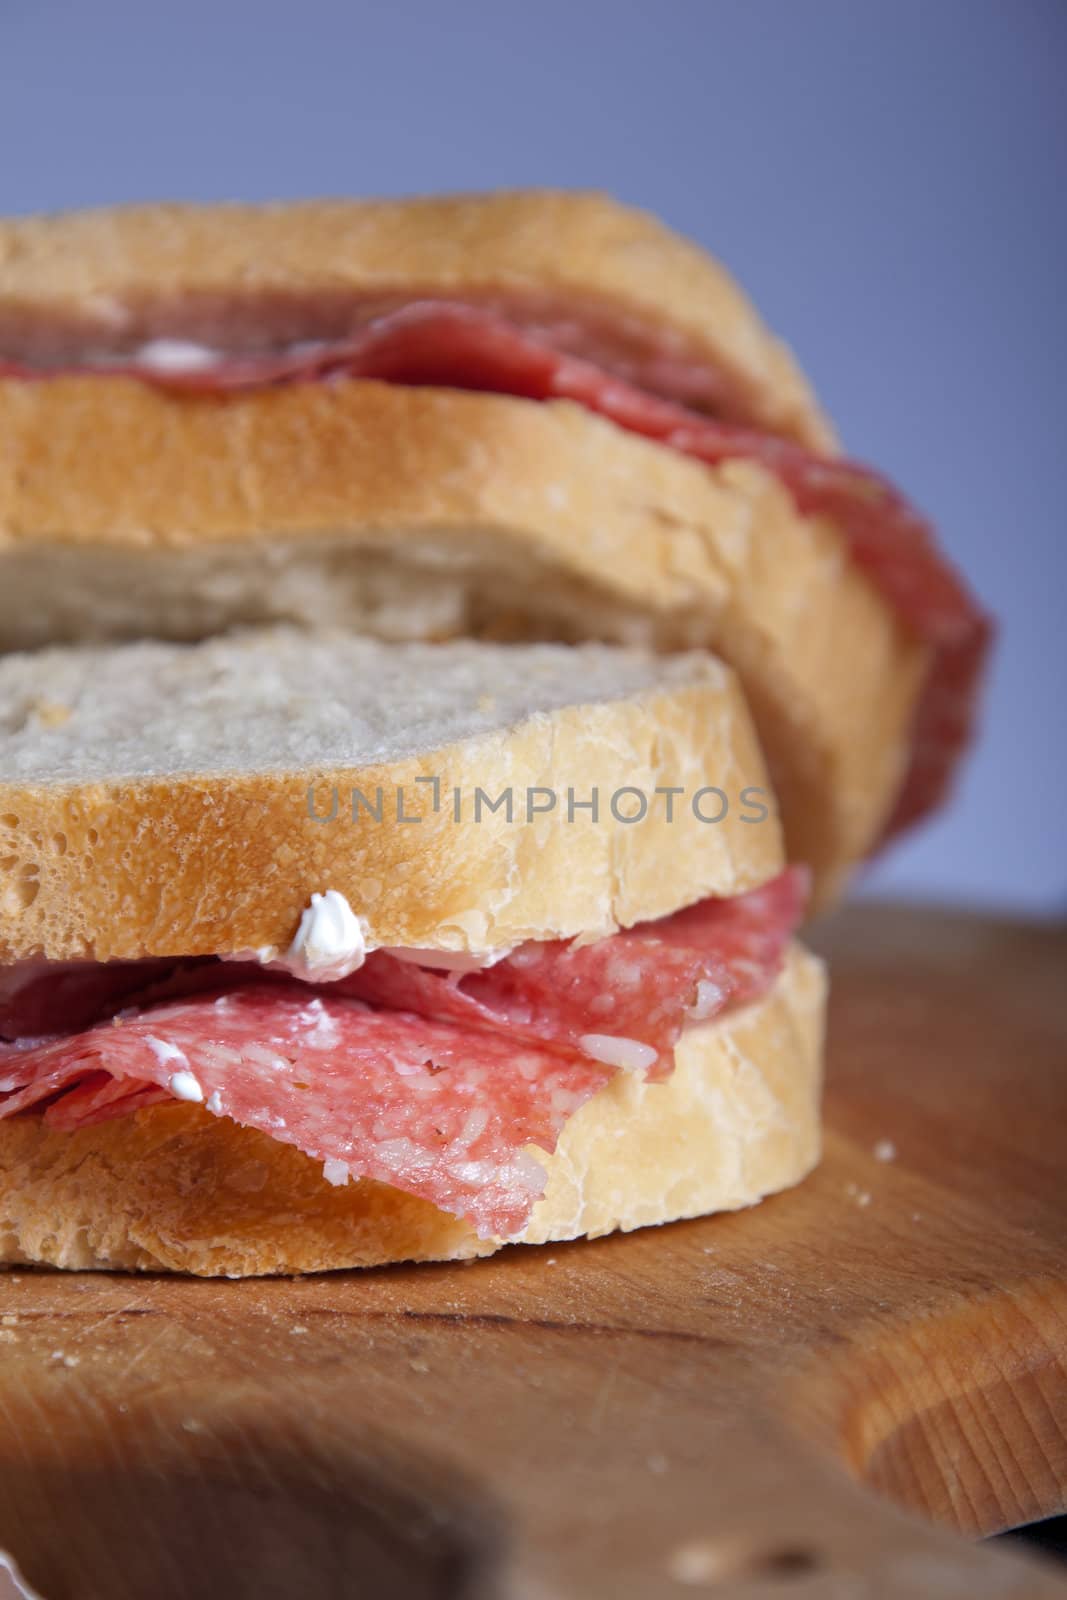 Two Sandwiches with salami and cheese on a wooden cutting board. Swallow Depth of Field